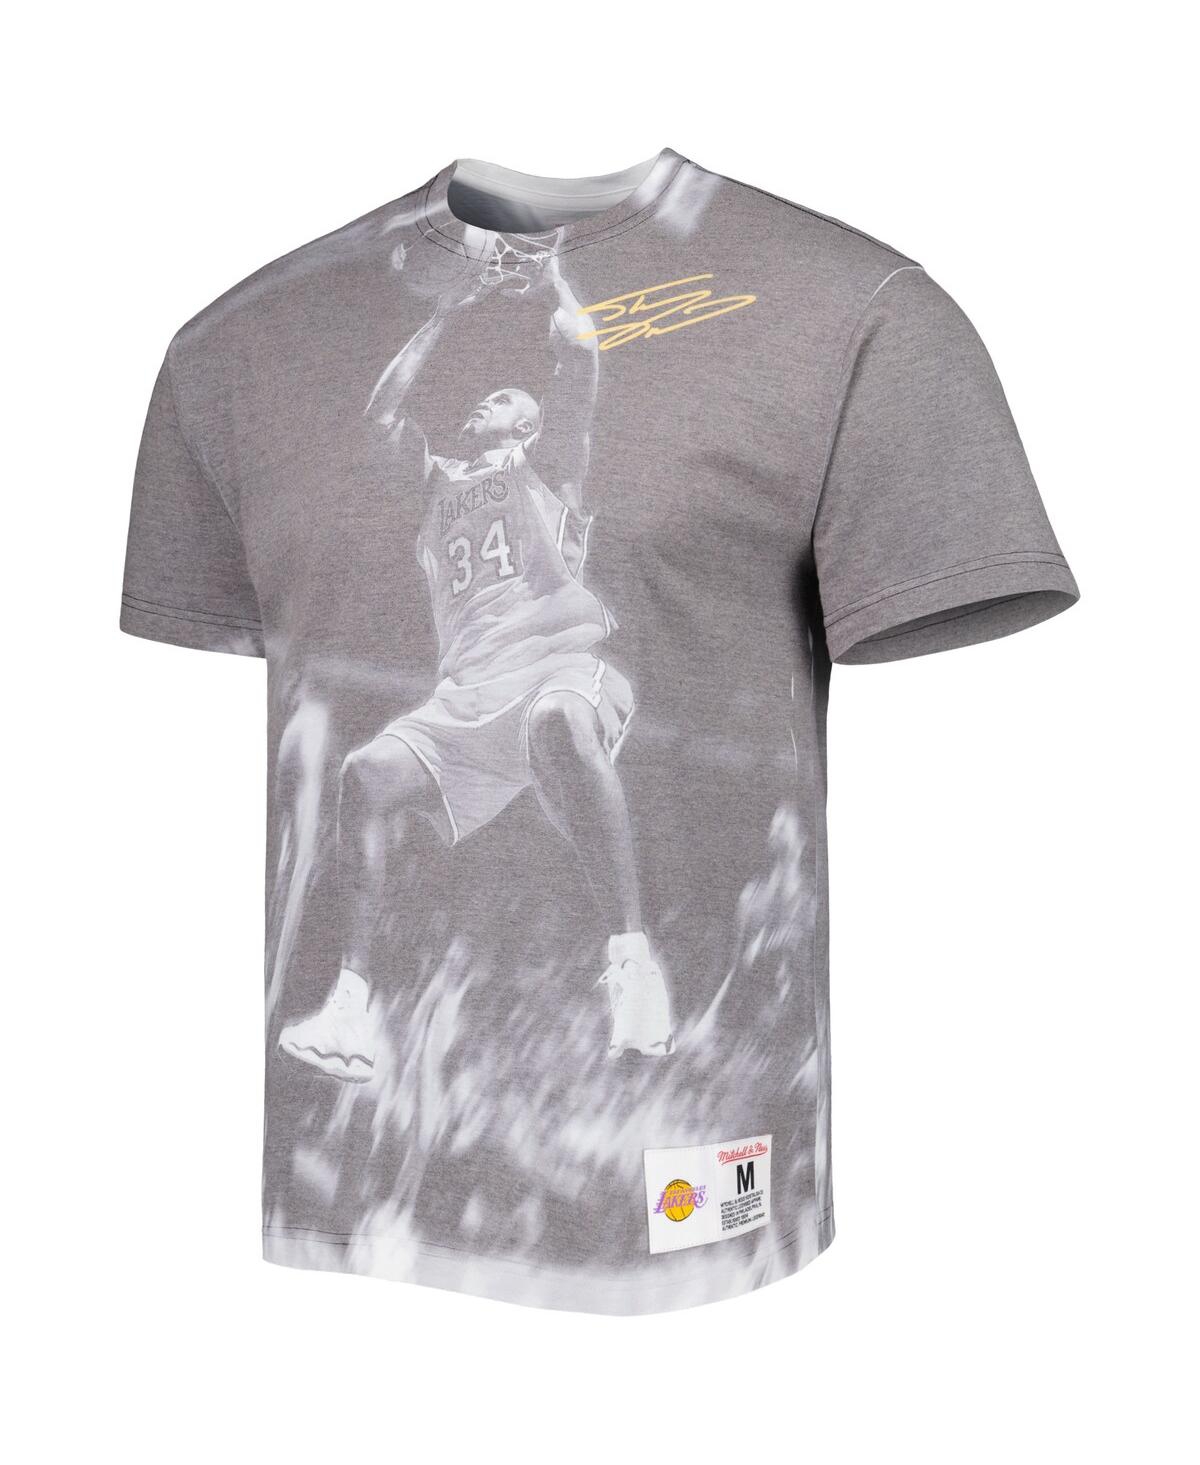 Shop Mitchell & Ness Men's  Shaquille O'neal Gray Los Angeles Lakers Above The Rim Sublimated T-shirt